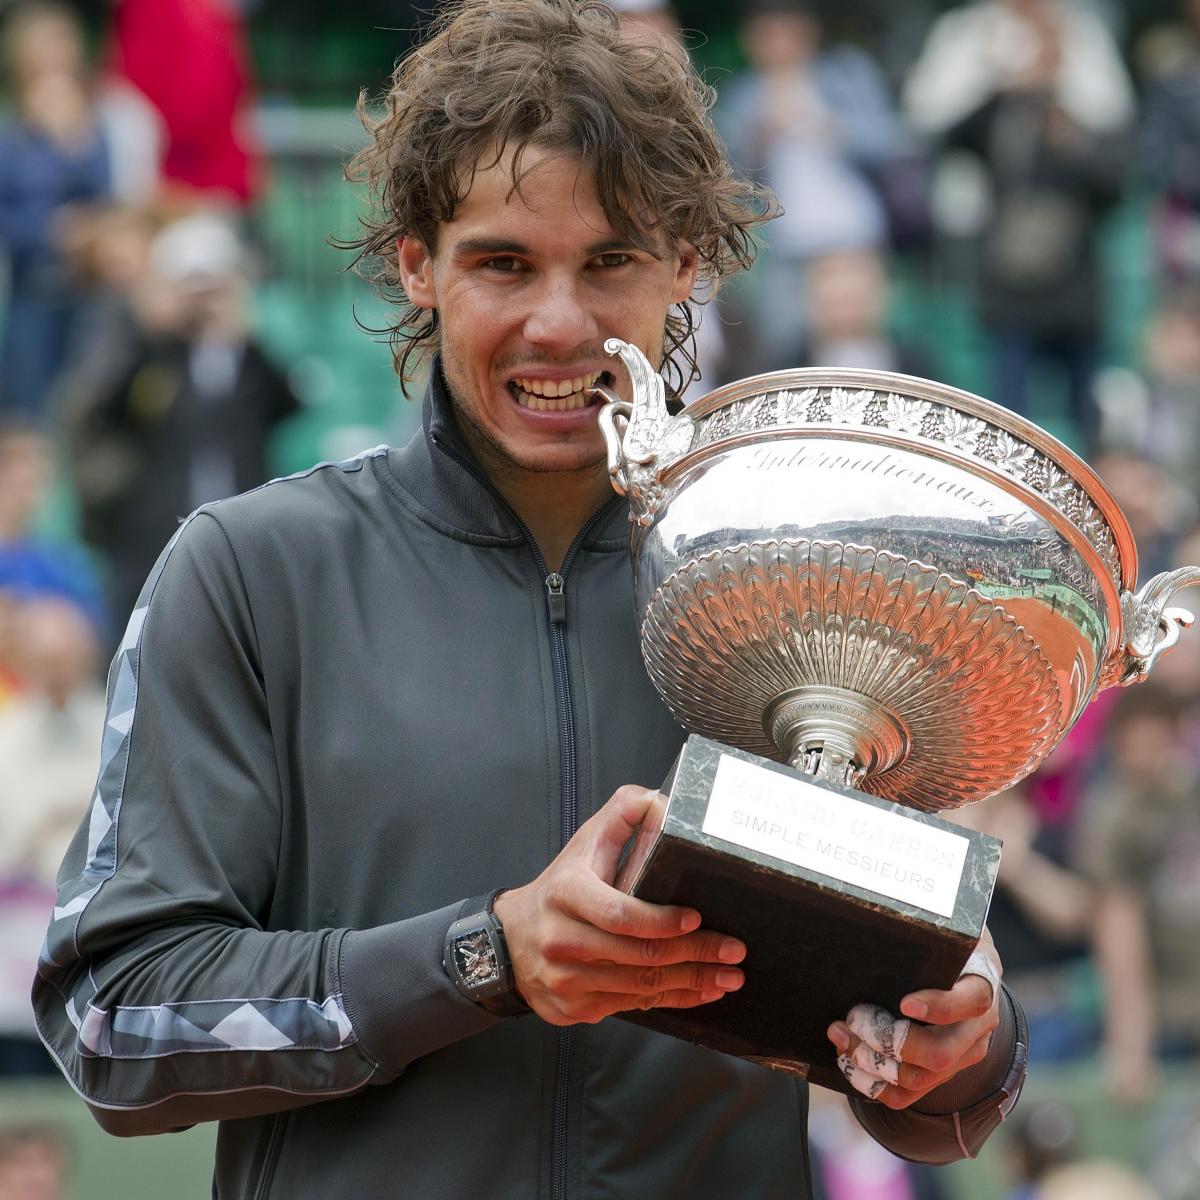 Rafael Nadal Smart to Take His Time Recovering from Knee Injury